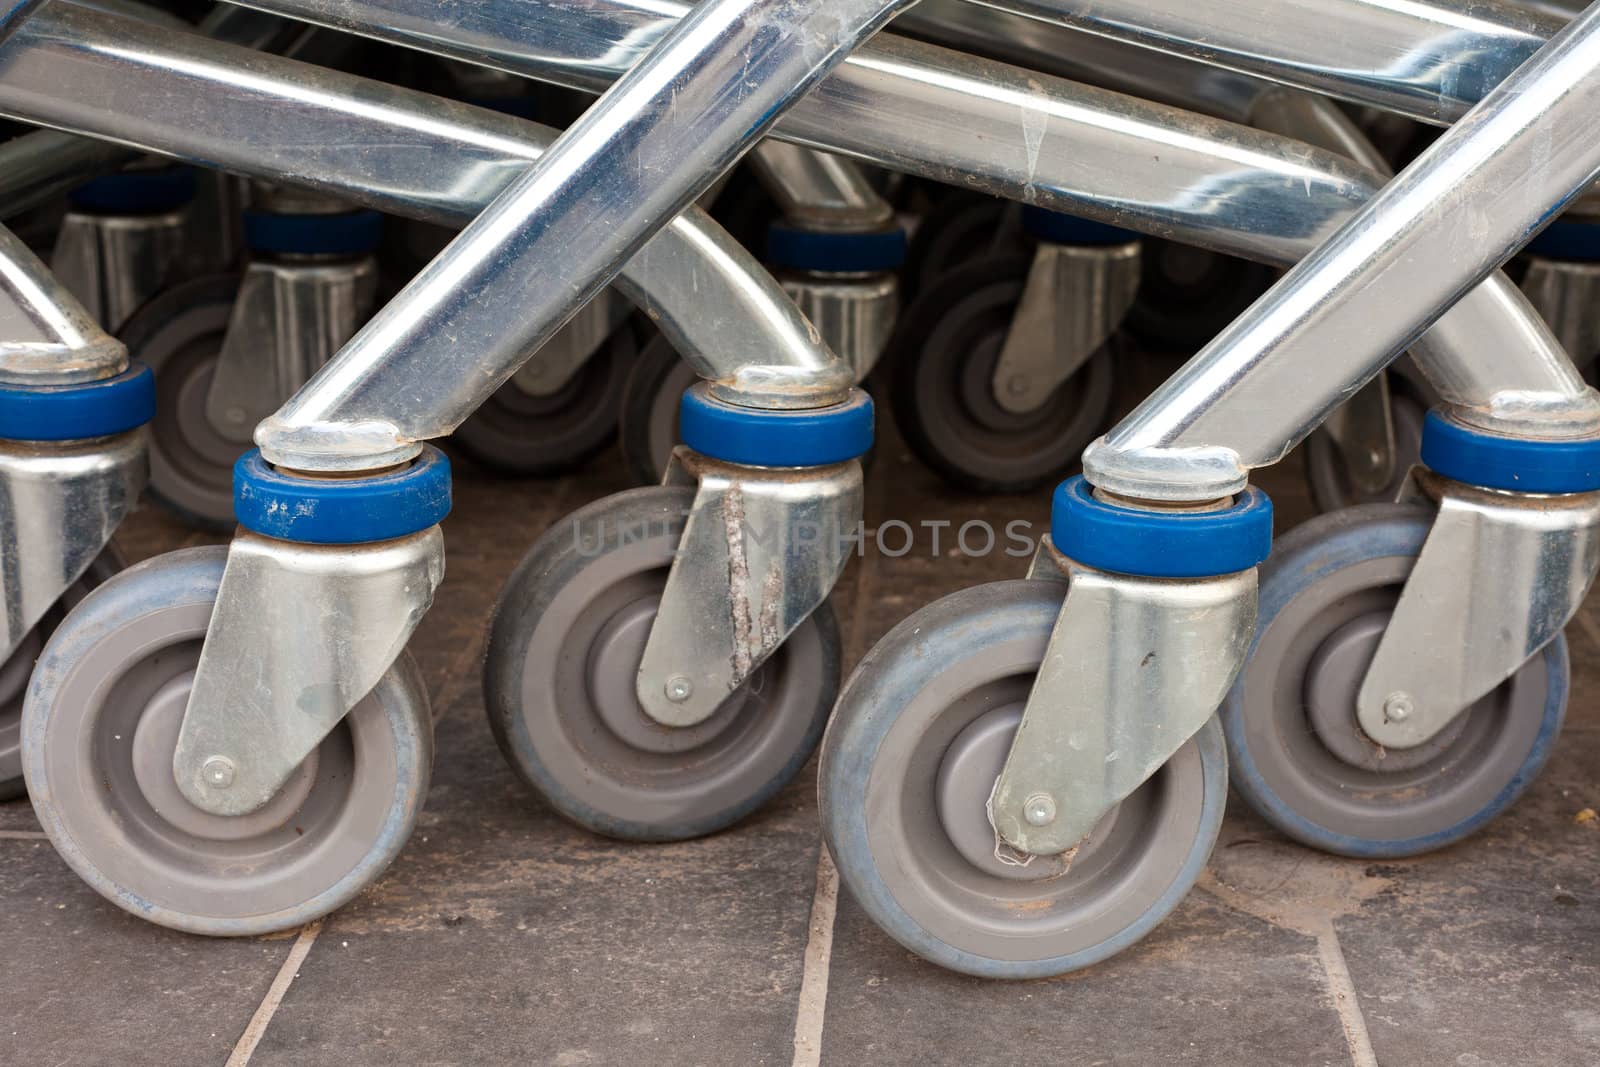 Wheels of shiny metal shopping carts stacked in a row.